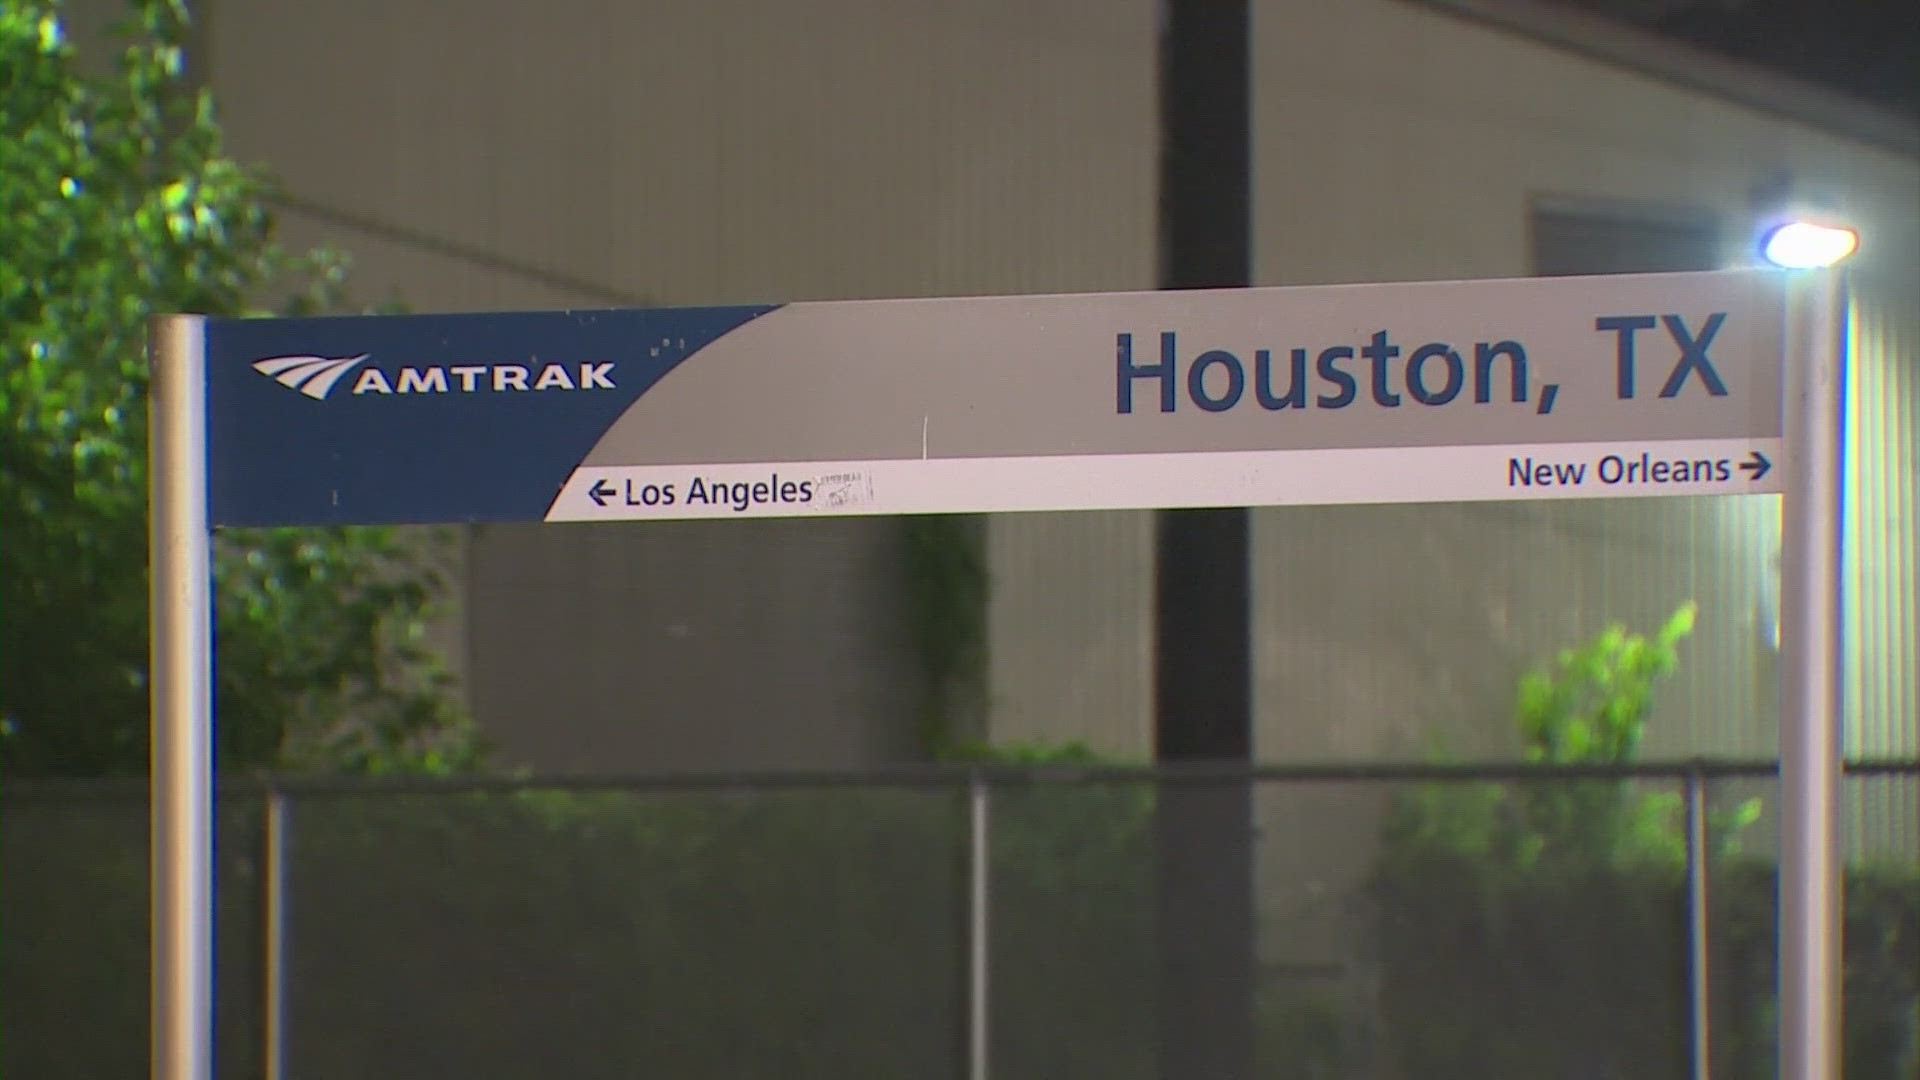 Authorities said a 16-year-old boy ran away from his Sugar Land home and was getting ready to board a train to Los Angeles when he was rescued.